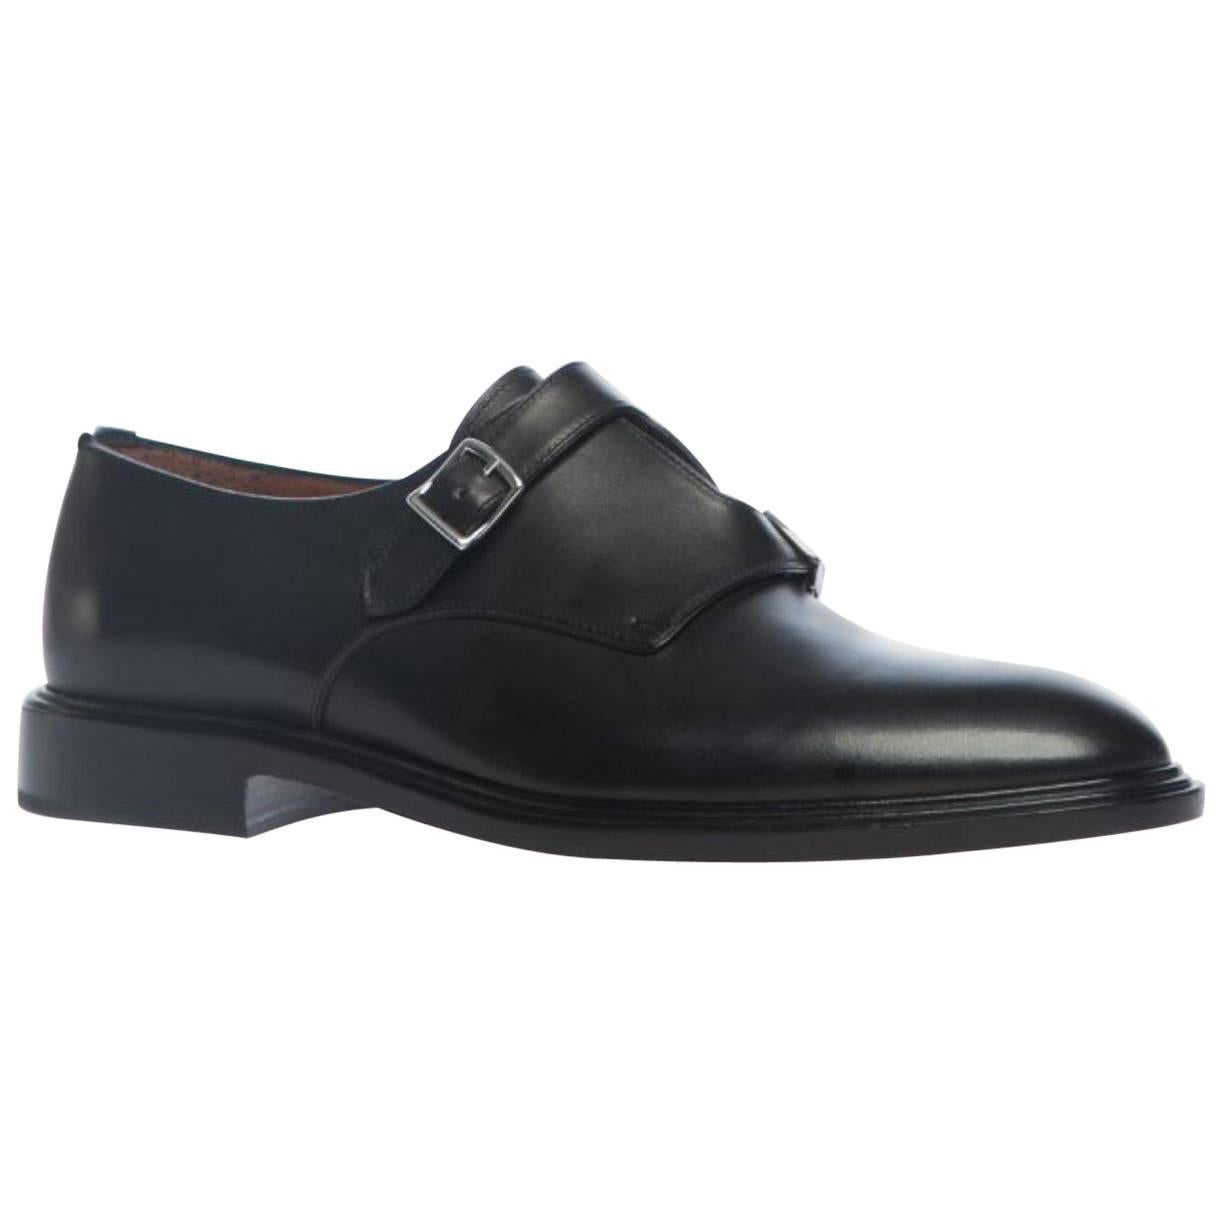 Givenchy Double Buckle Monk Strap Shoes (Size - 41) For Sale